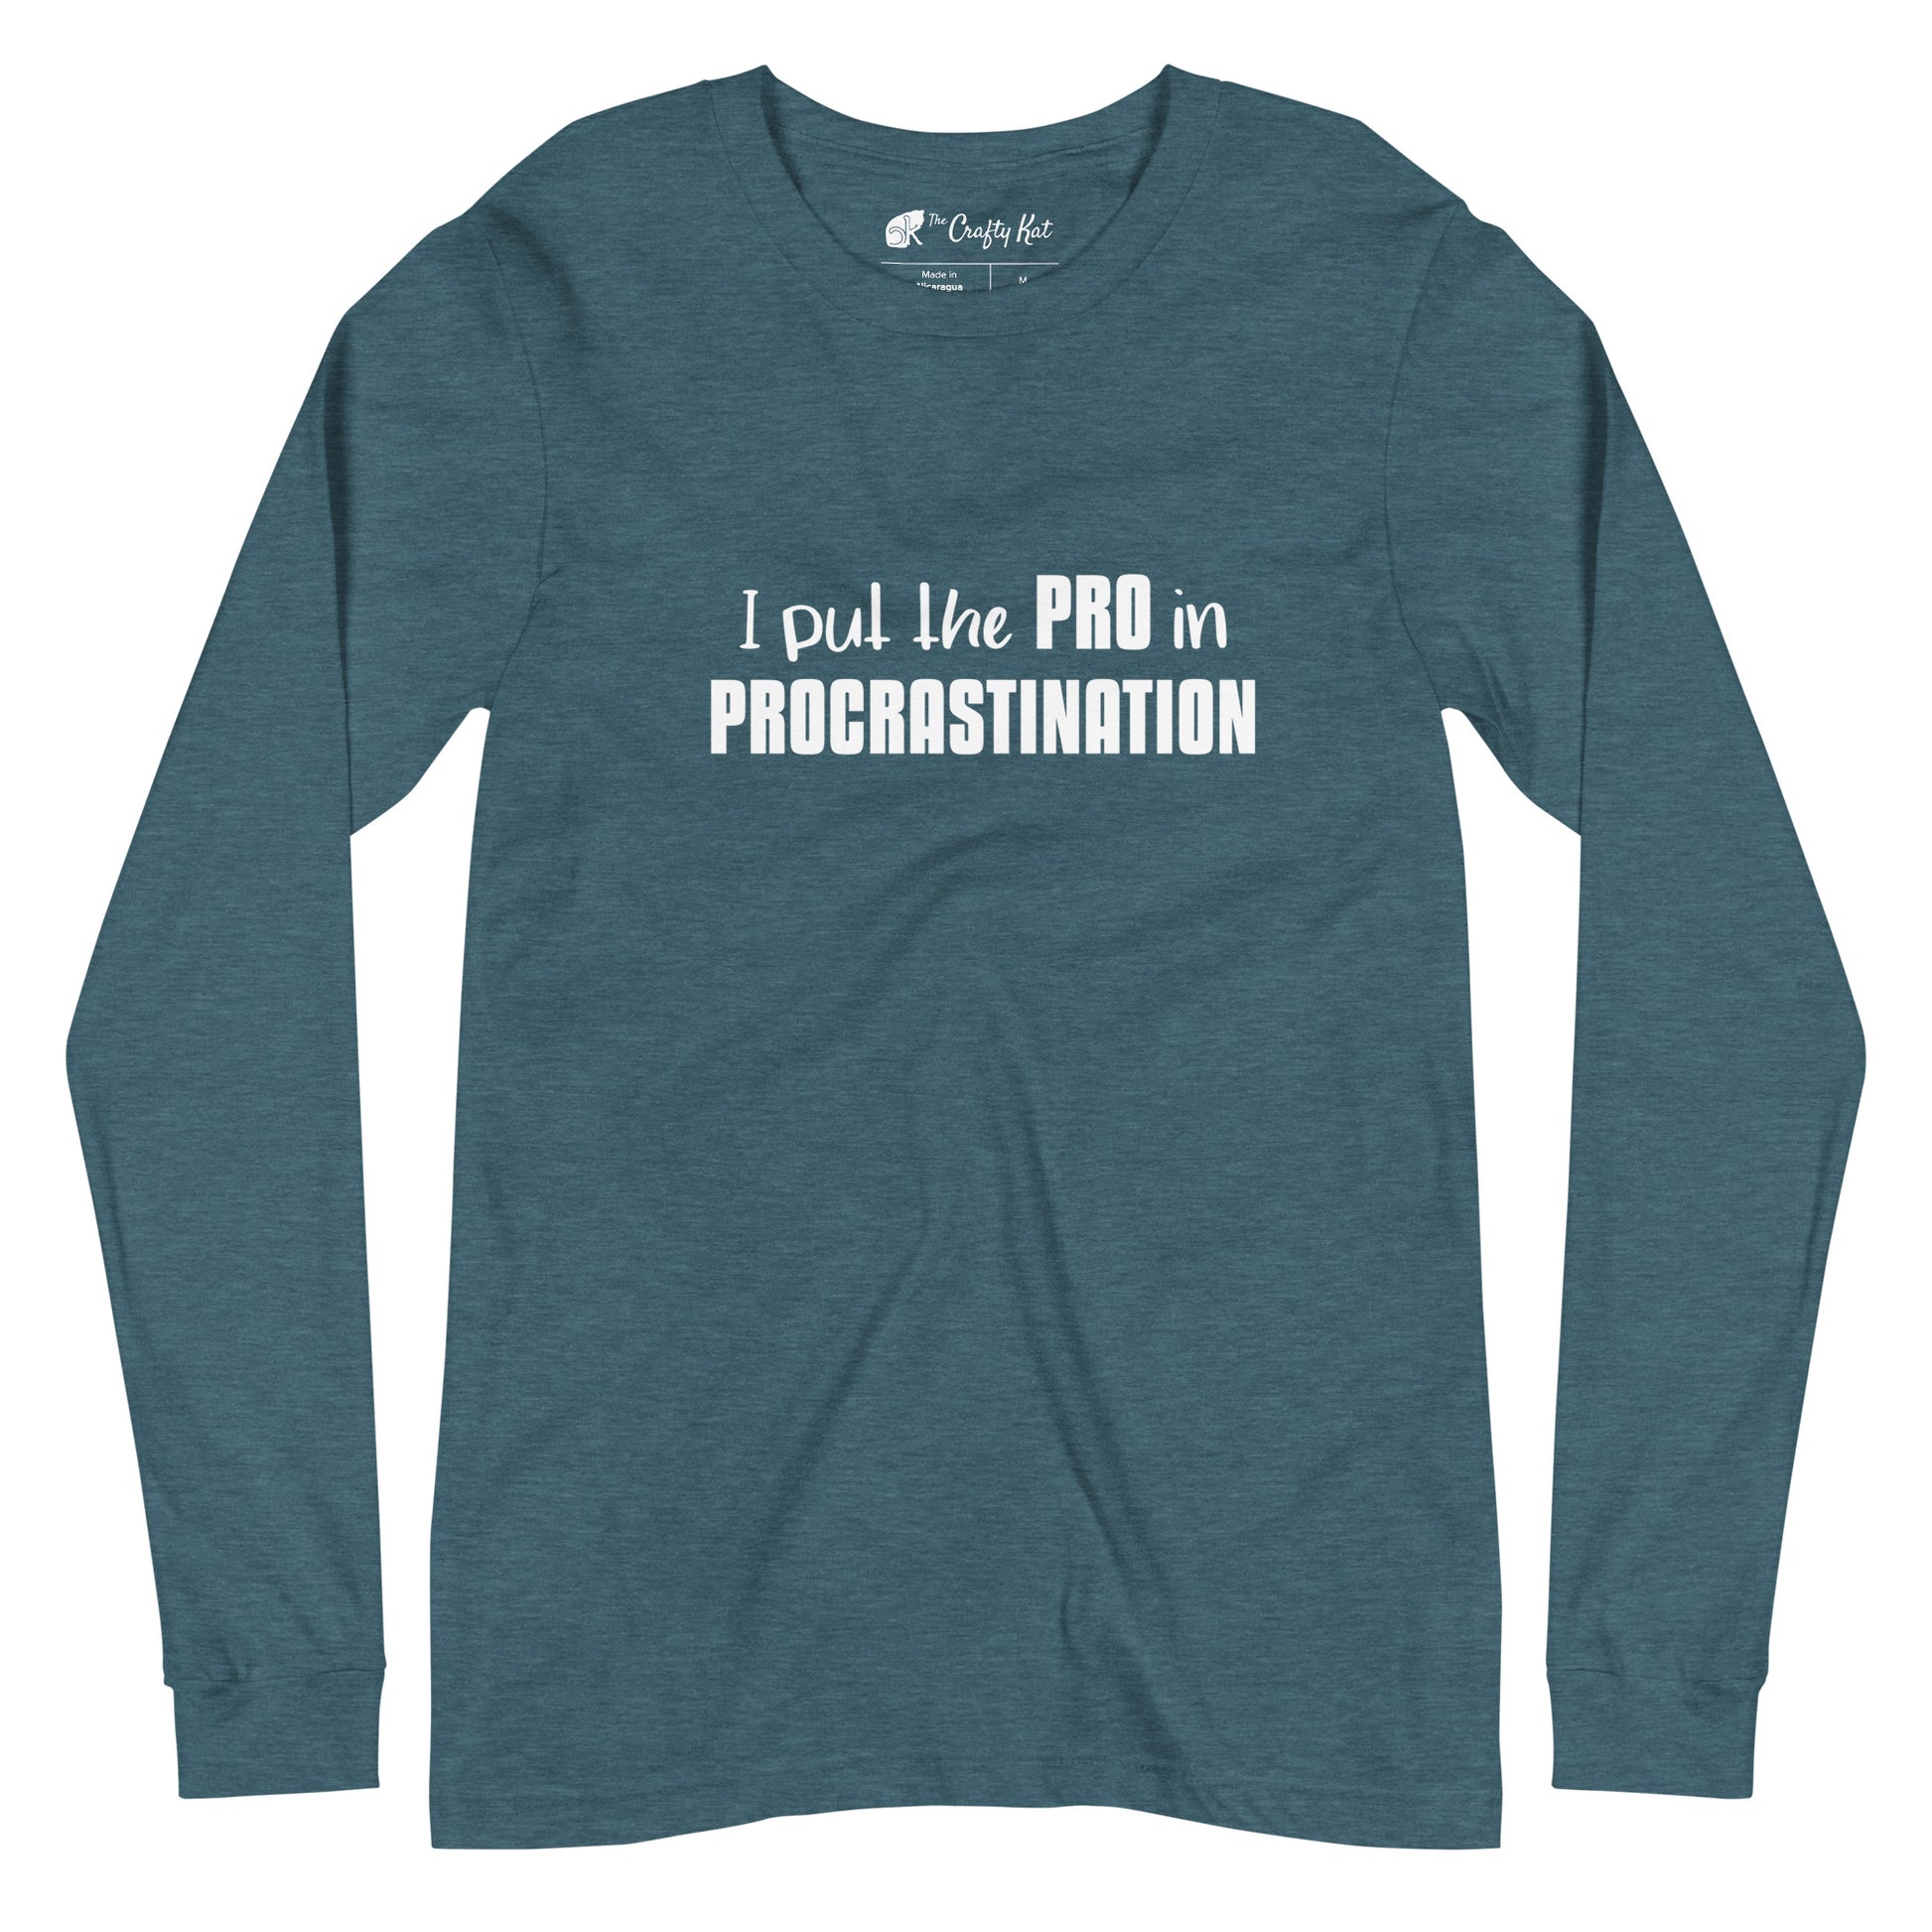 Heather Deep Teal long-sleeve shirt with text graphic: "I put the PRO in PROCRASTINATION"